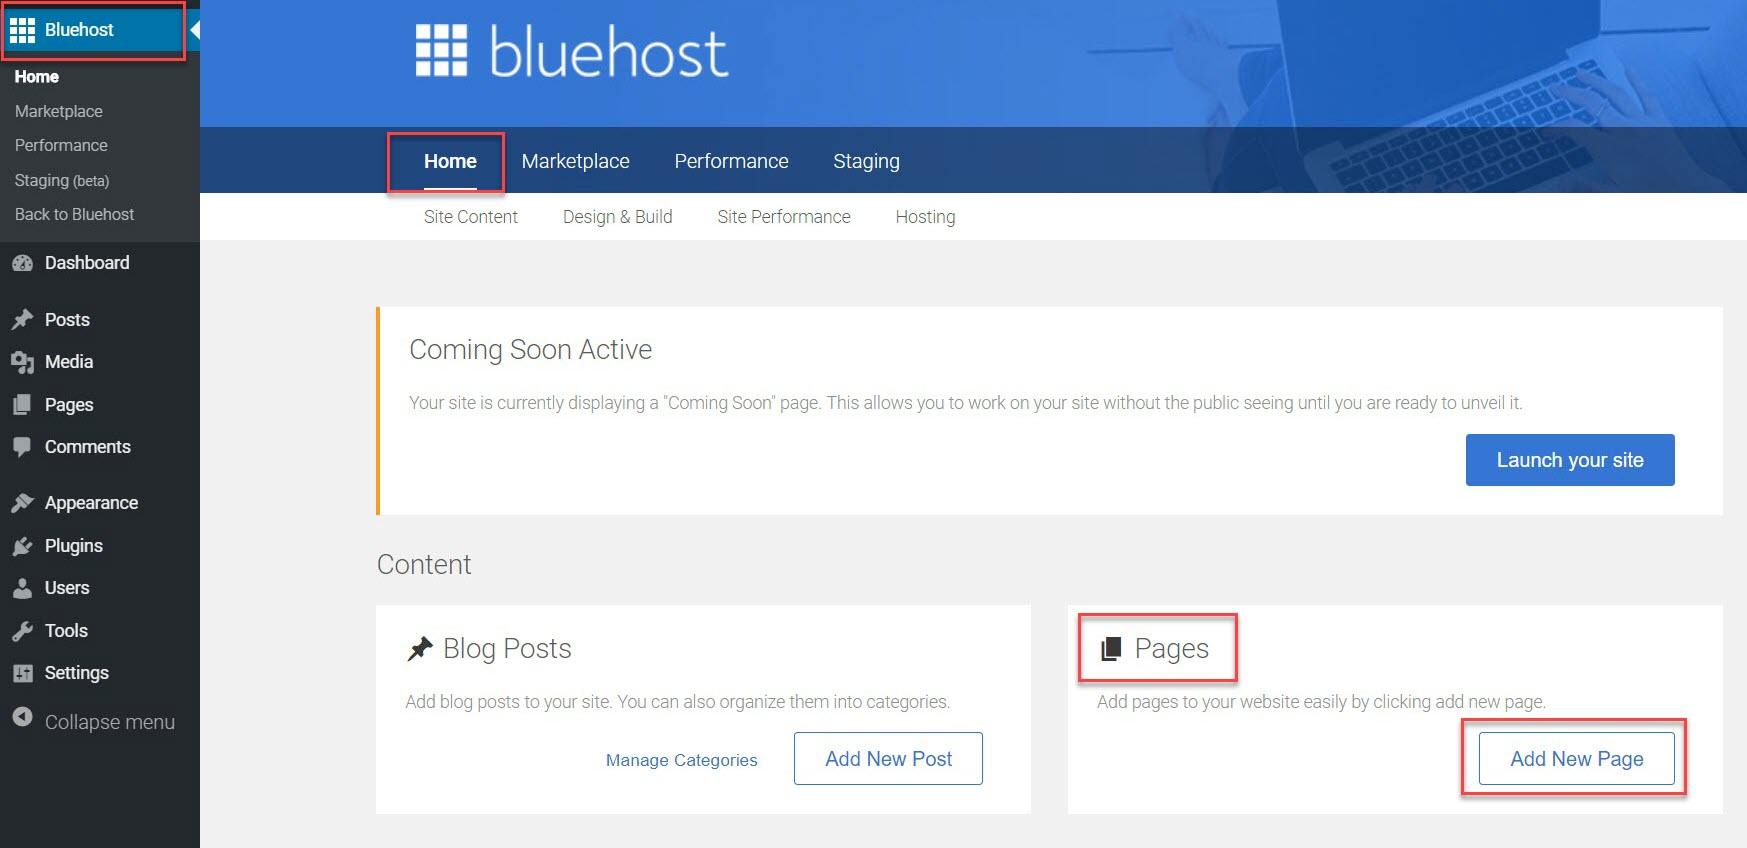 How To Install Wordpress On Bluehost January 2020 Images, Photos, Reviews